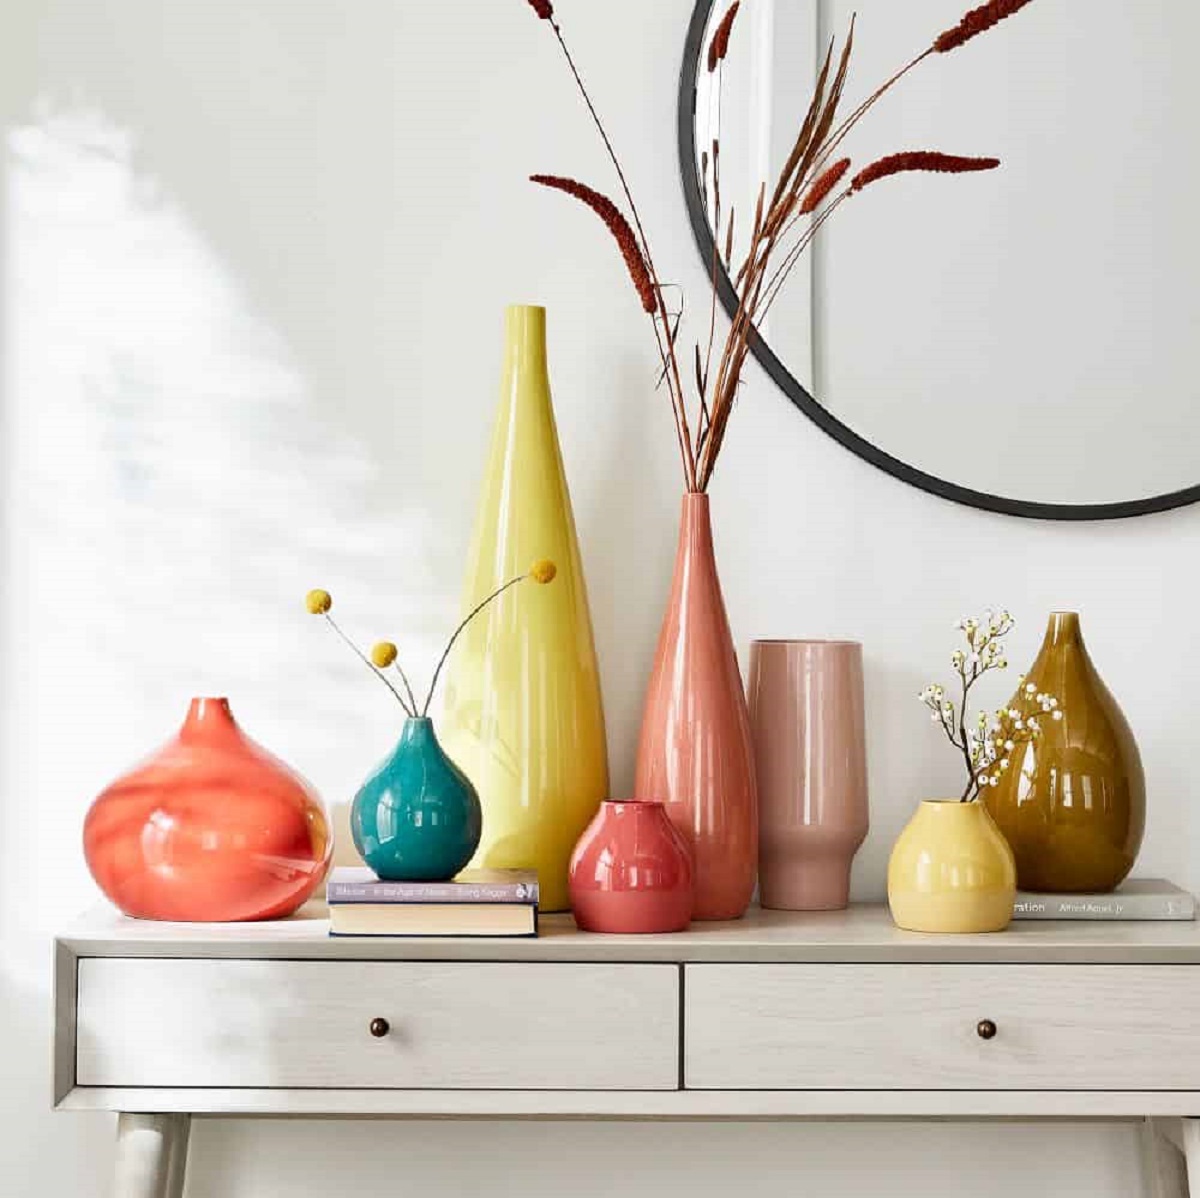 Decorating With Vases: 13 Ways To Create Beautiful Displays